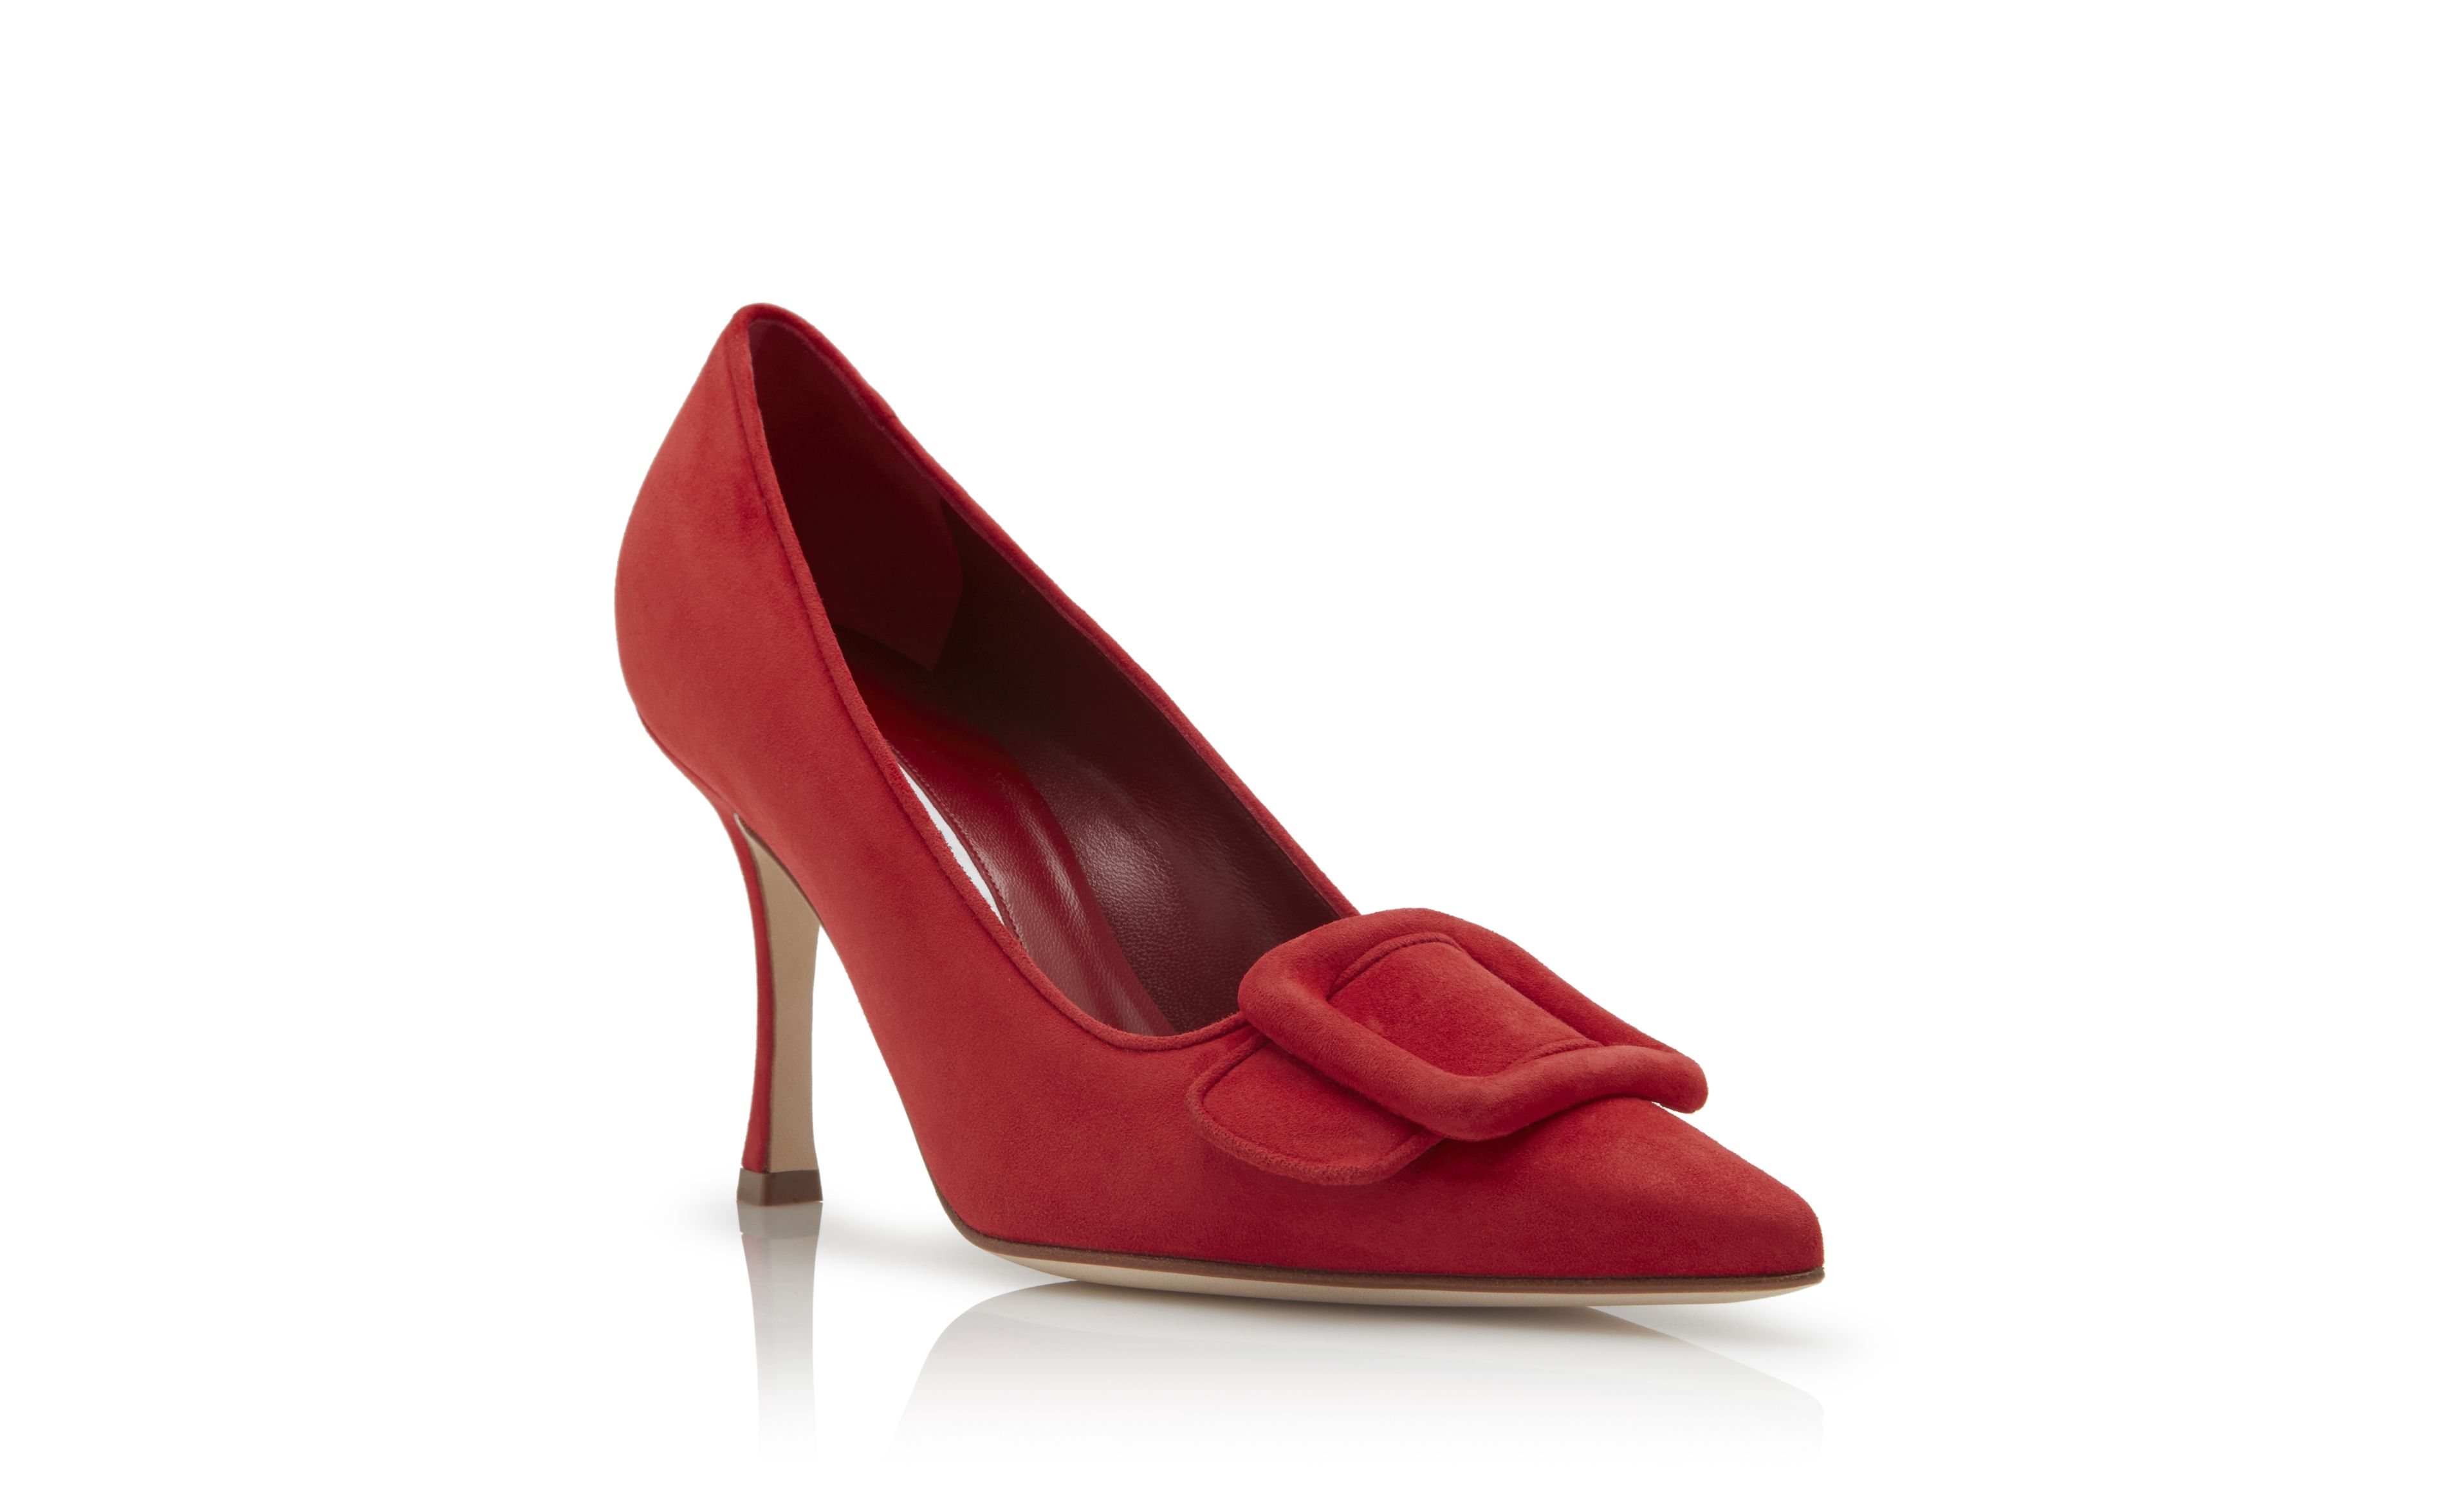 Designer Bright Red Suede Buckle Detail Pumps - Image Upsell